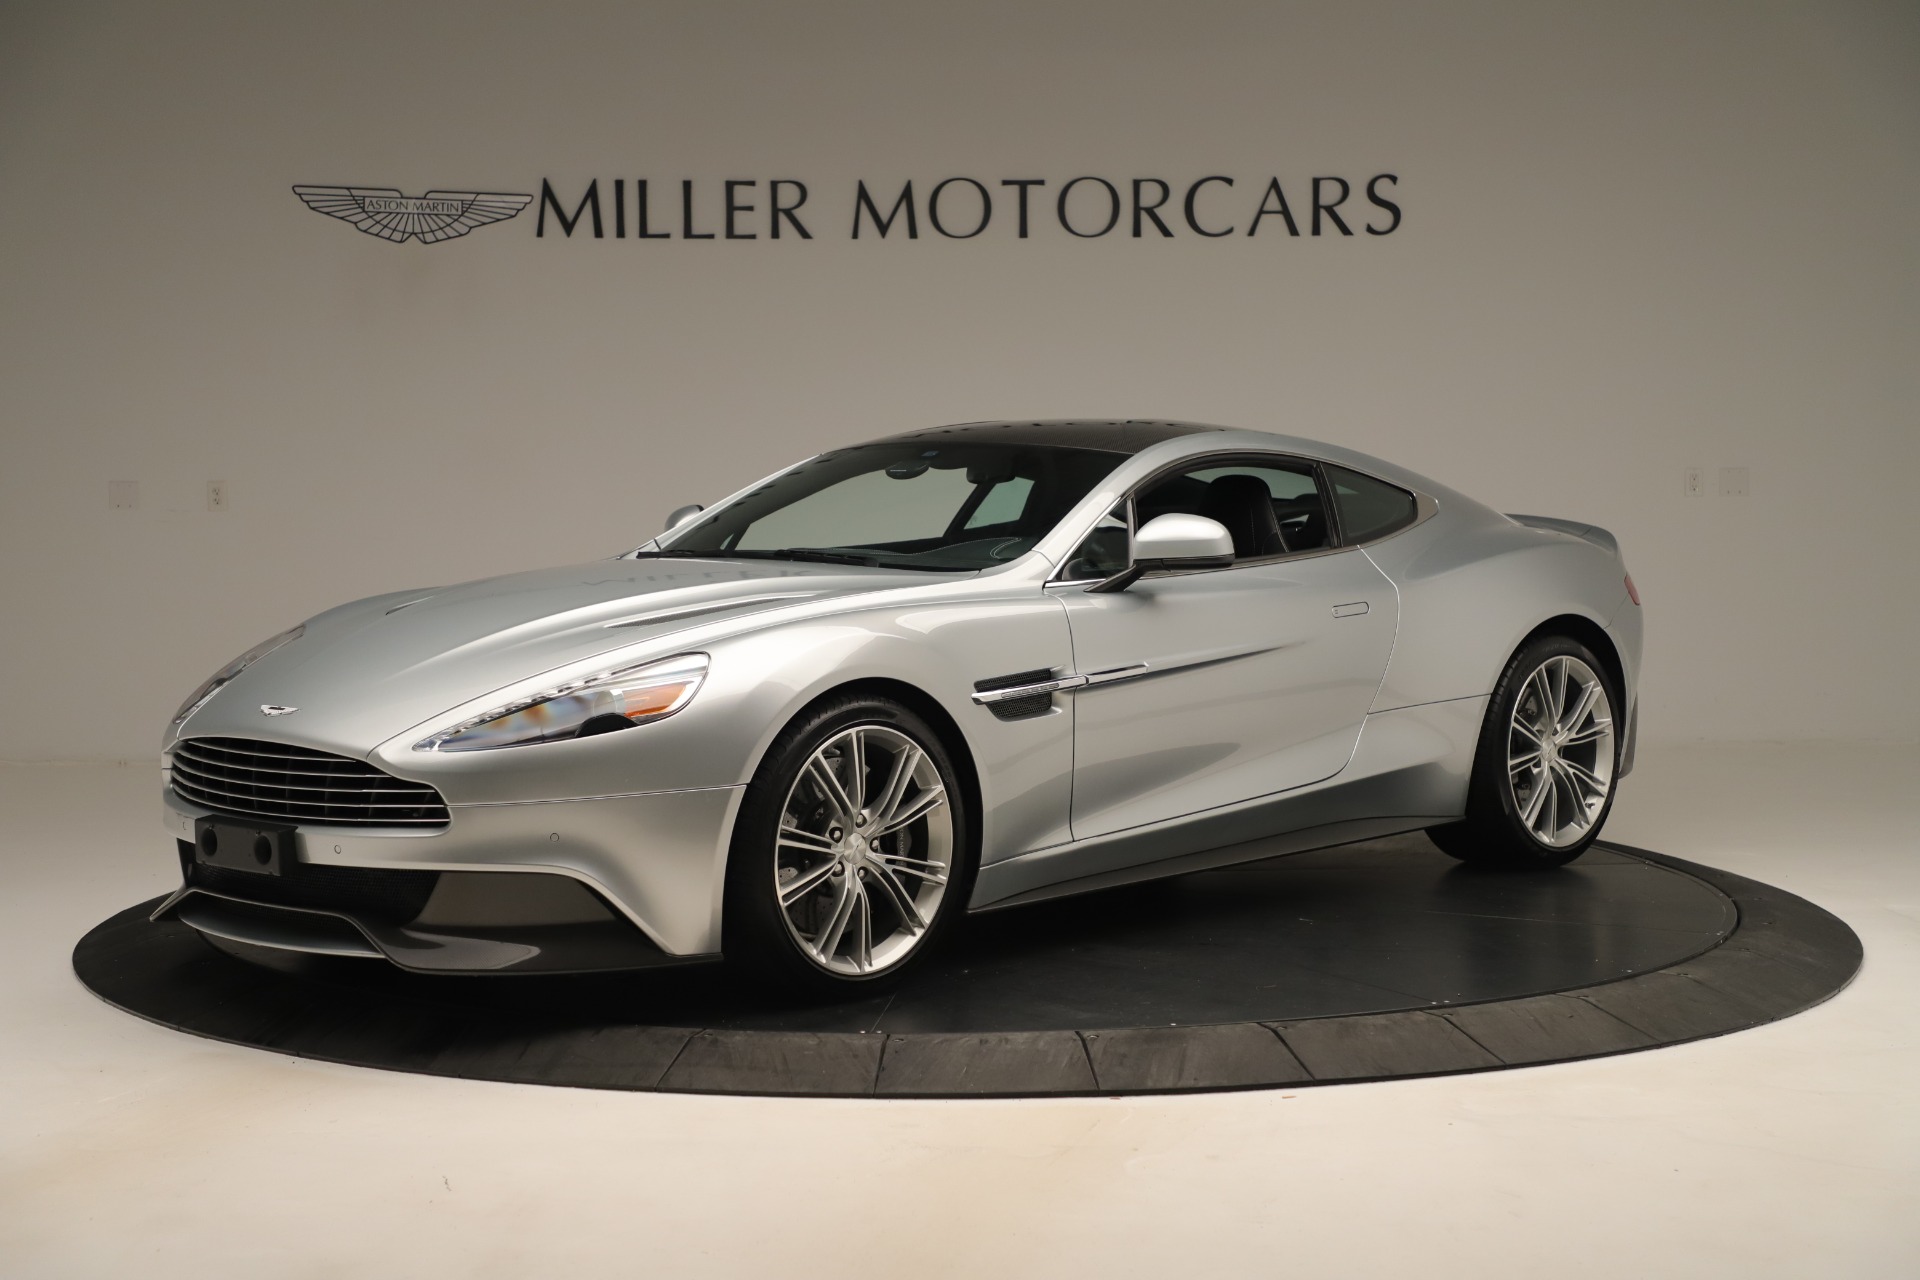 Used 2014 Aston Martin Vanquish Coupe for sale Sold at Aston Martin of Greenwich in Greenwich CT 06830 1